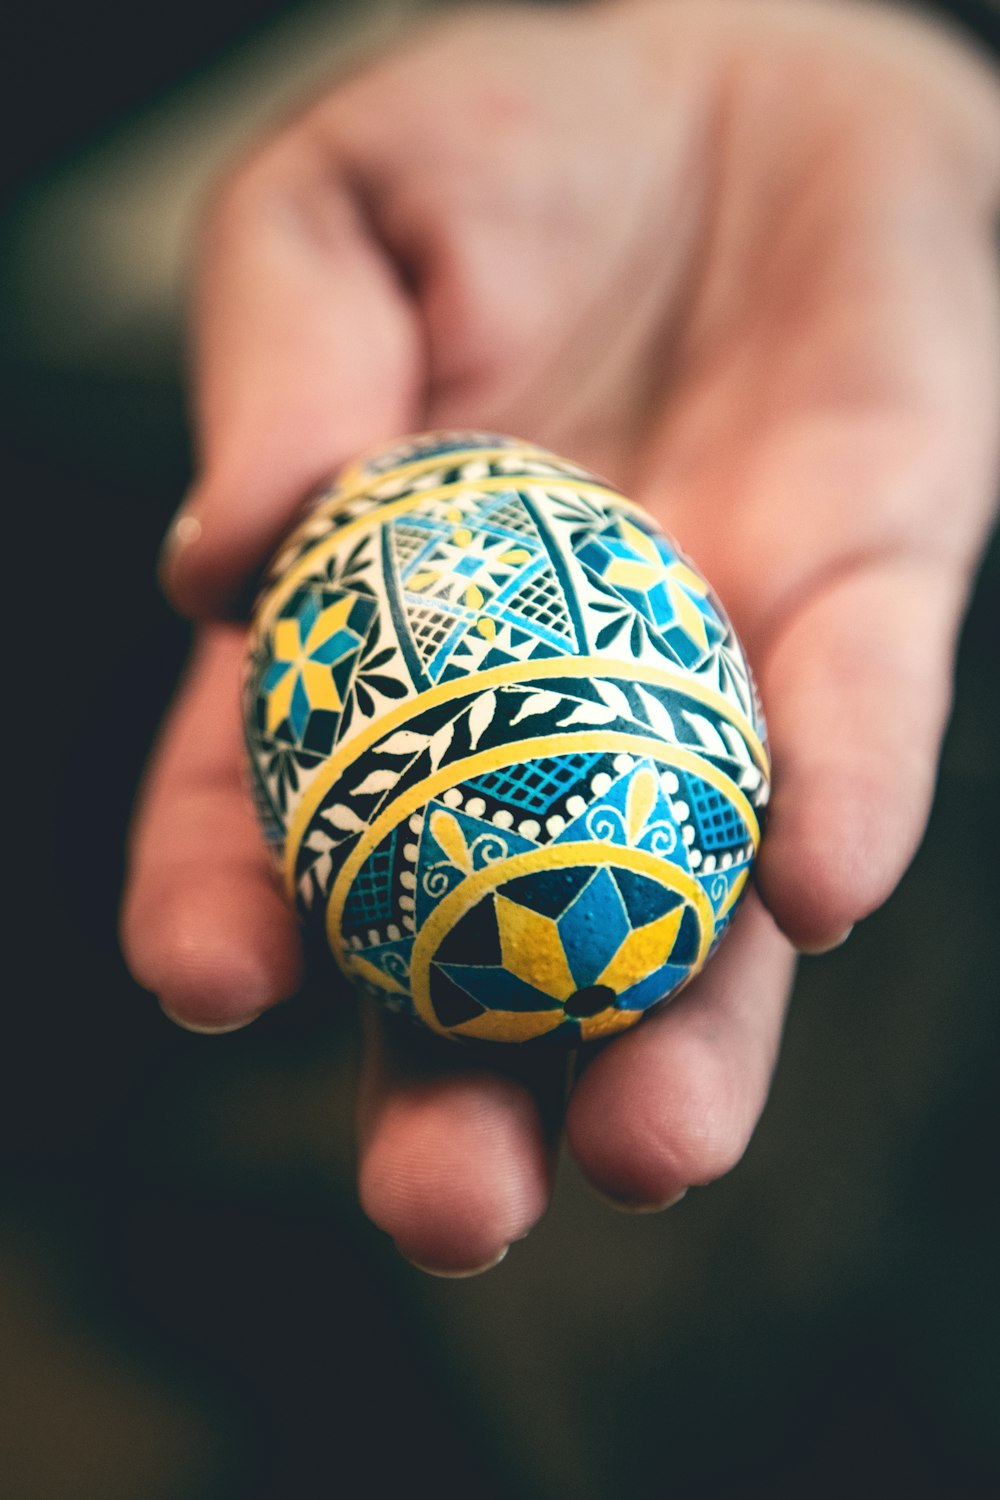 a person holding a painted egg in their hand